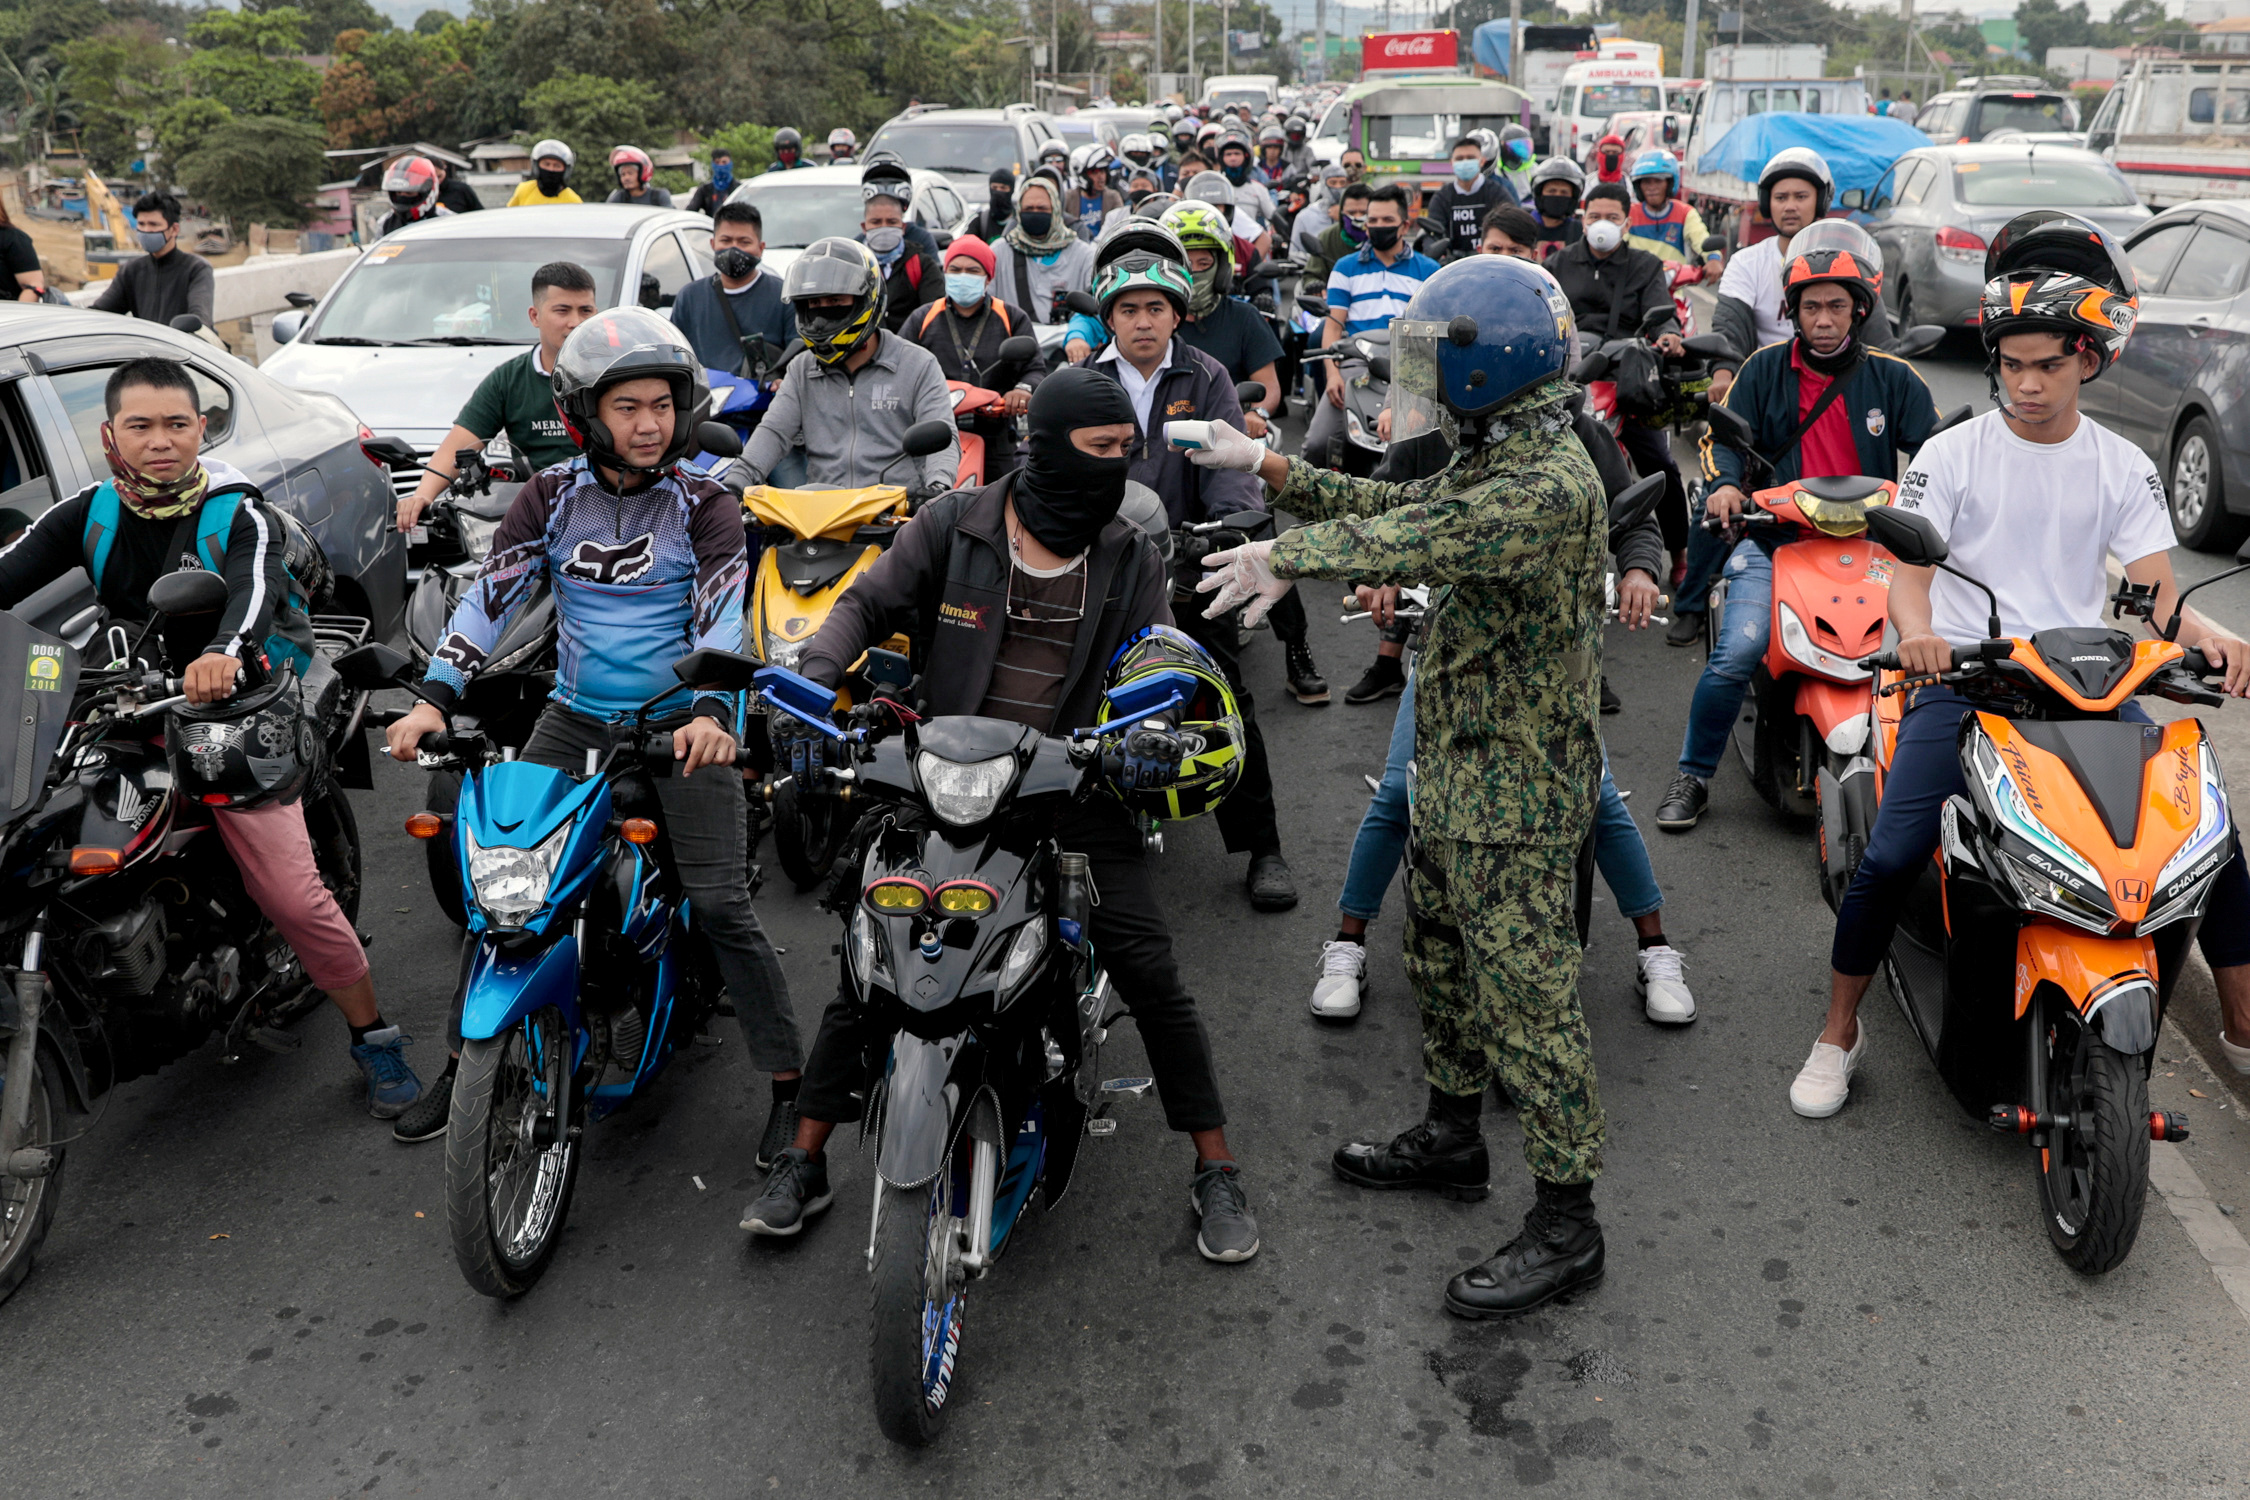 A police officer checks the body temperature motorists attempting to cross a checkpoint placed amidst the lockdown of the country's capital, to contain the spread of coronavirus, in the outskirts of Quezon City, Metro Manila